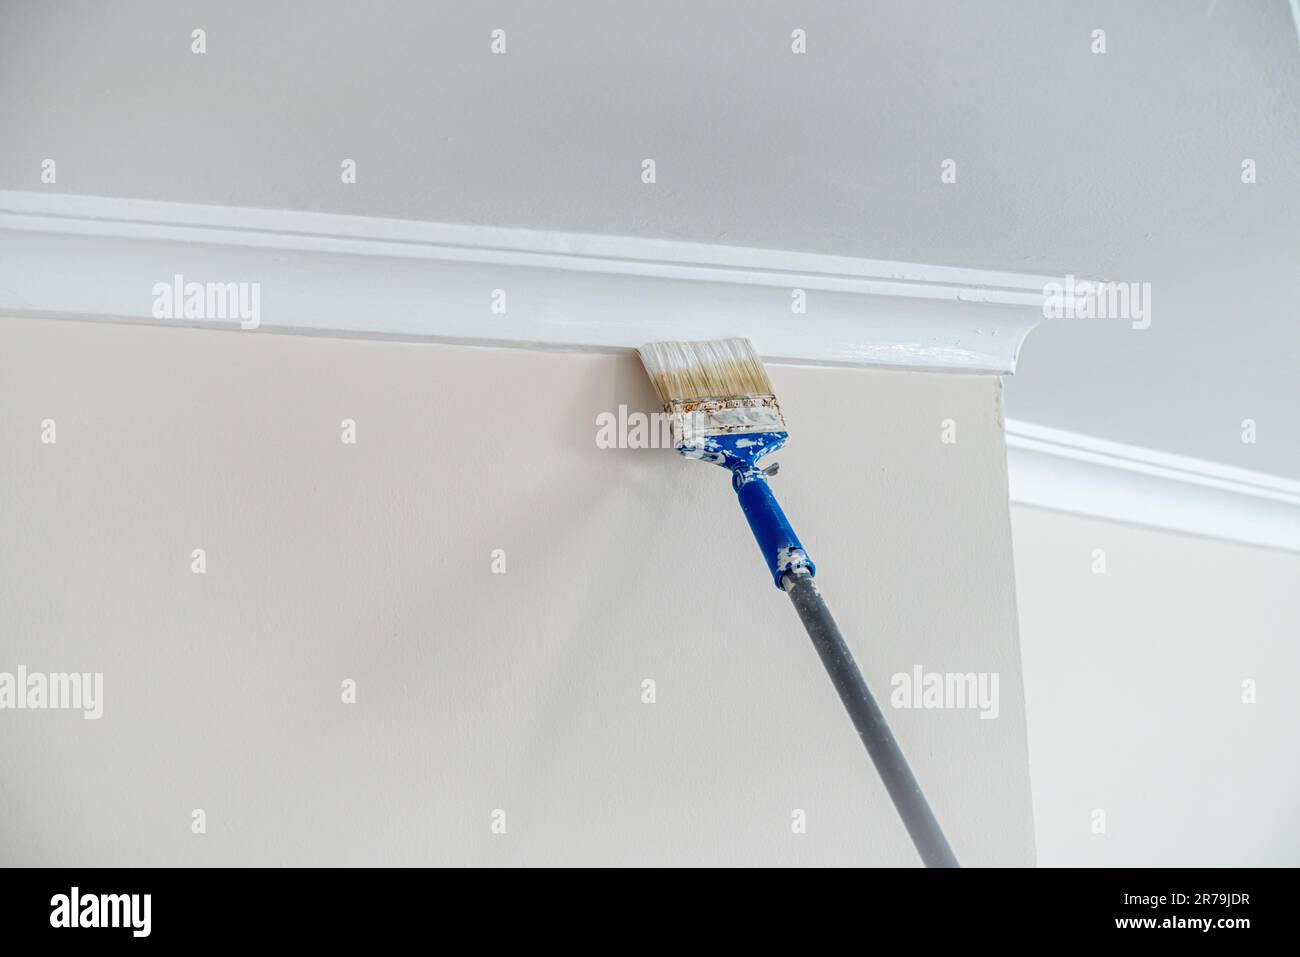 Painter painting the ceiling corners and led light edges with a brush before painting the room ceiling Stock Photo